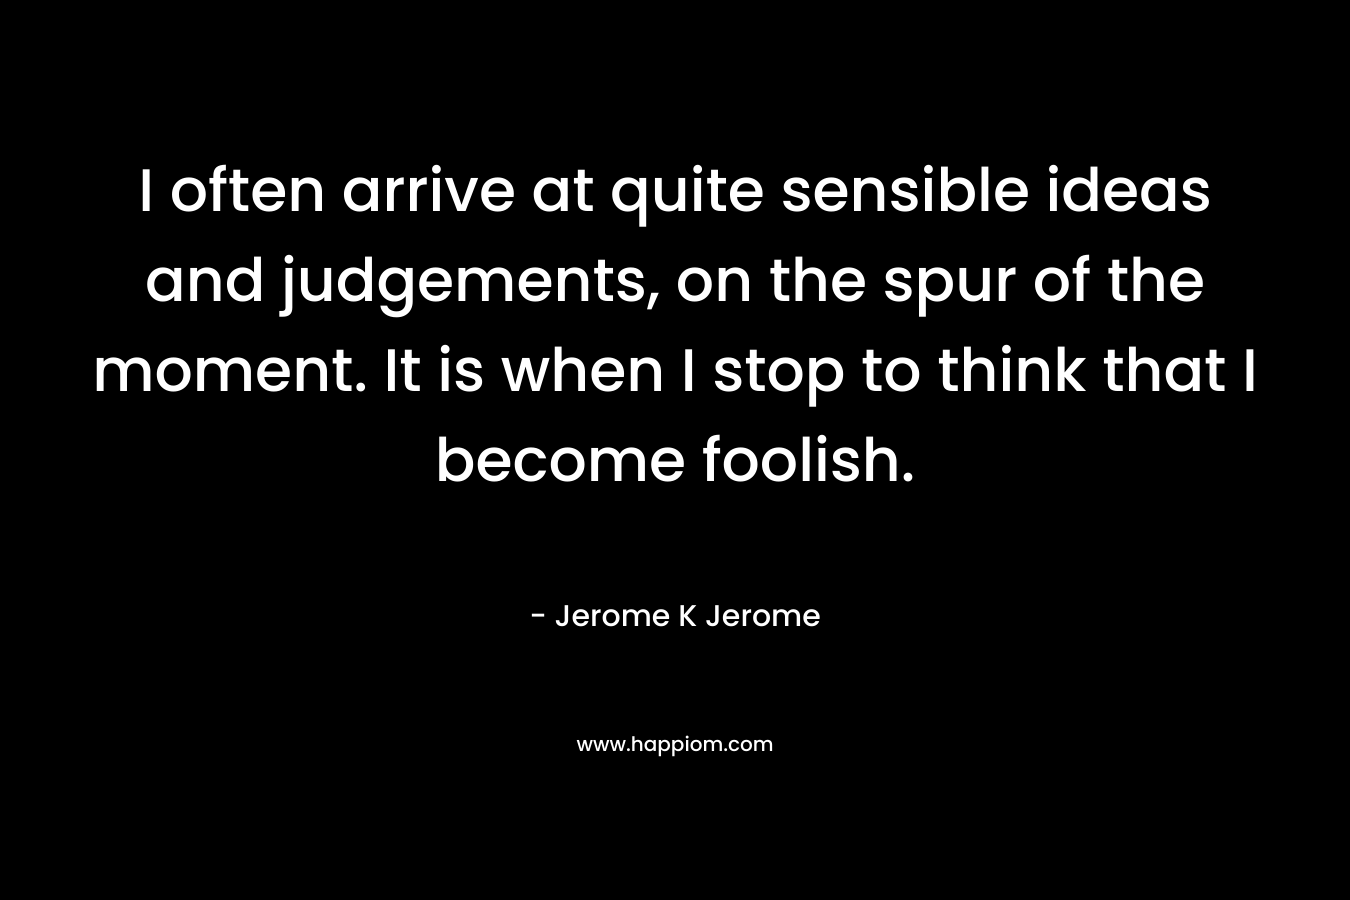 I often arrive at quite sensible ideas and judgements, on the spur of the moment. It is when I stop to think that I become foolish.